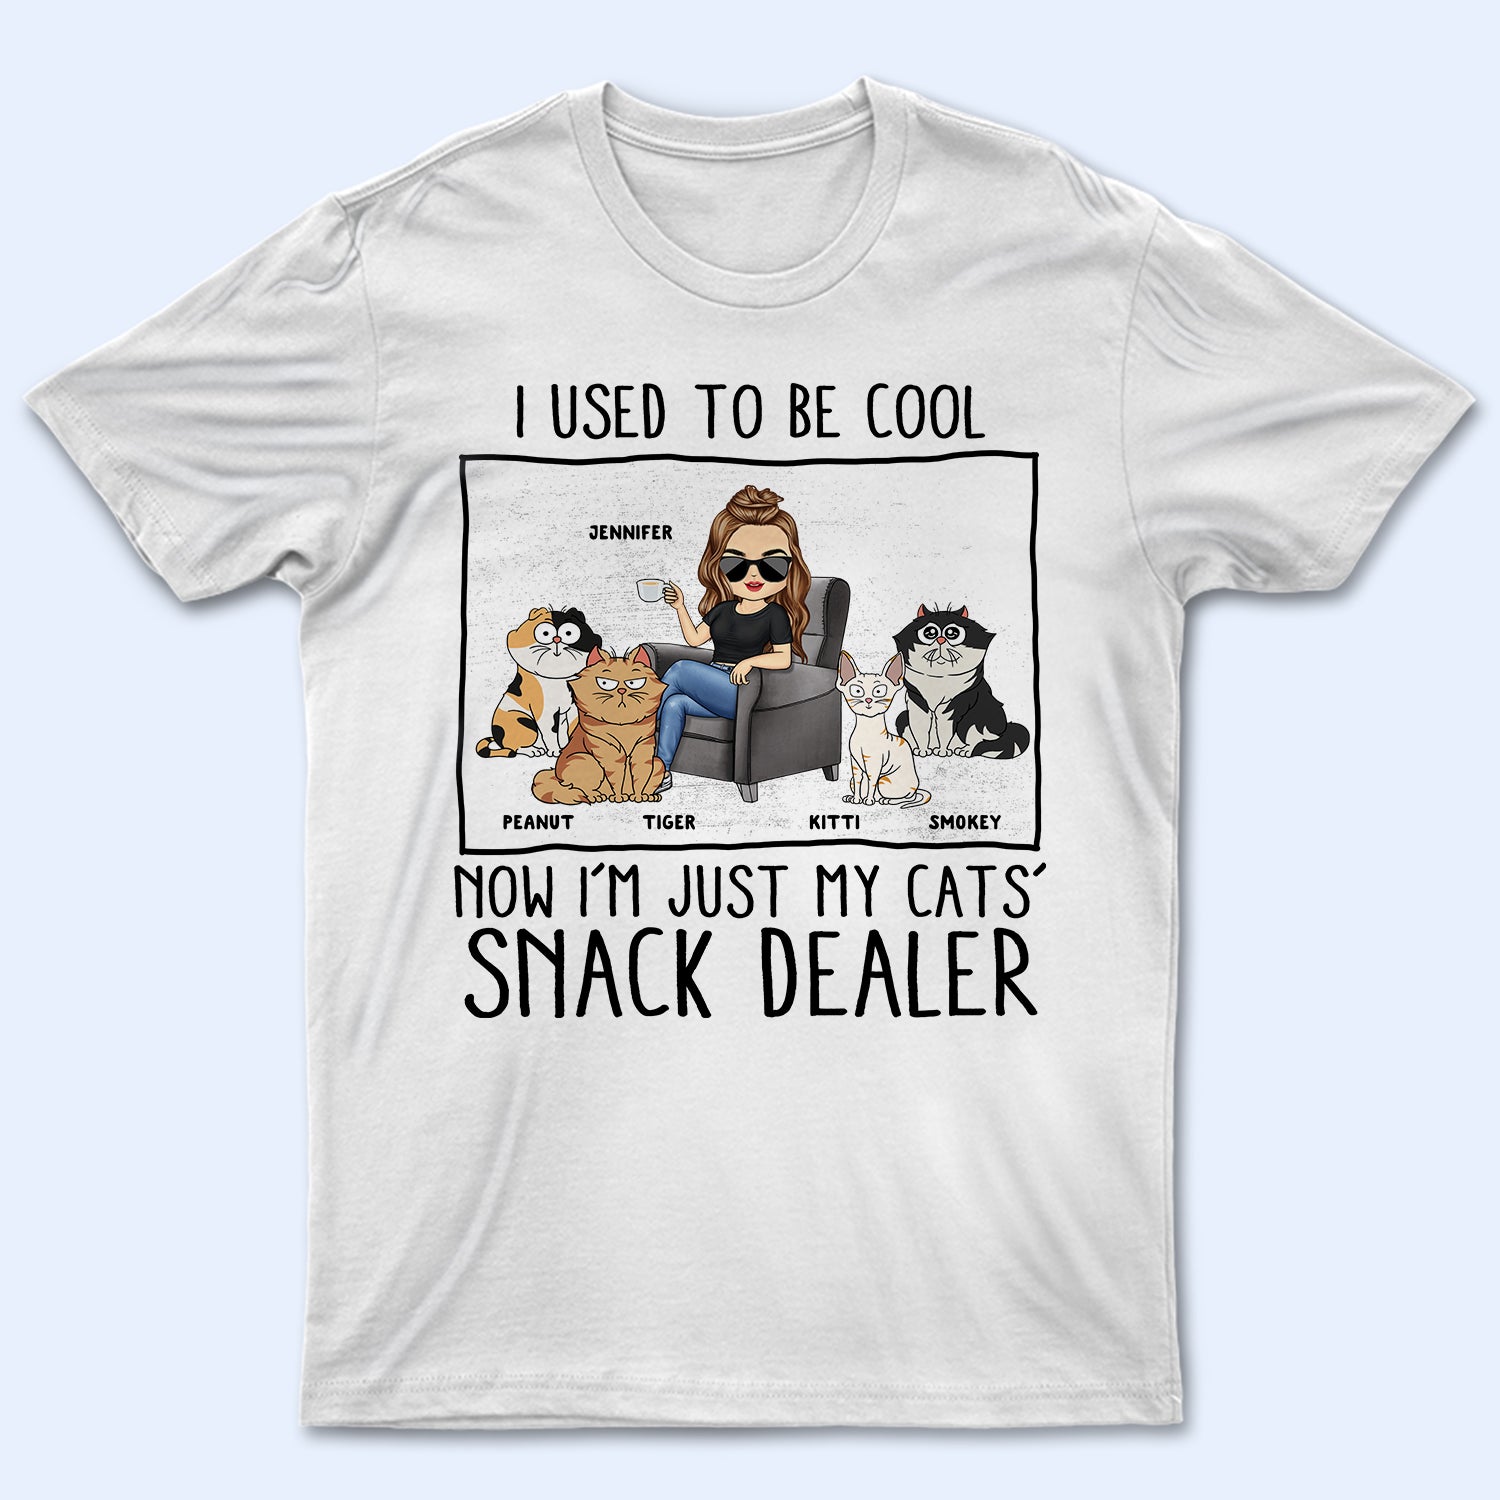 I'm Just My Cats' Snack Dealer - Gift For Cat Mom, Cat Lovers - Personalized T Shirt